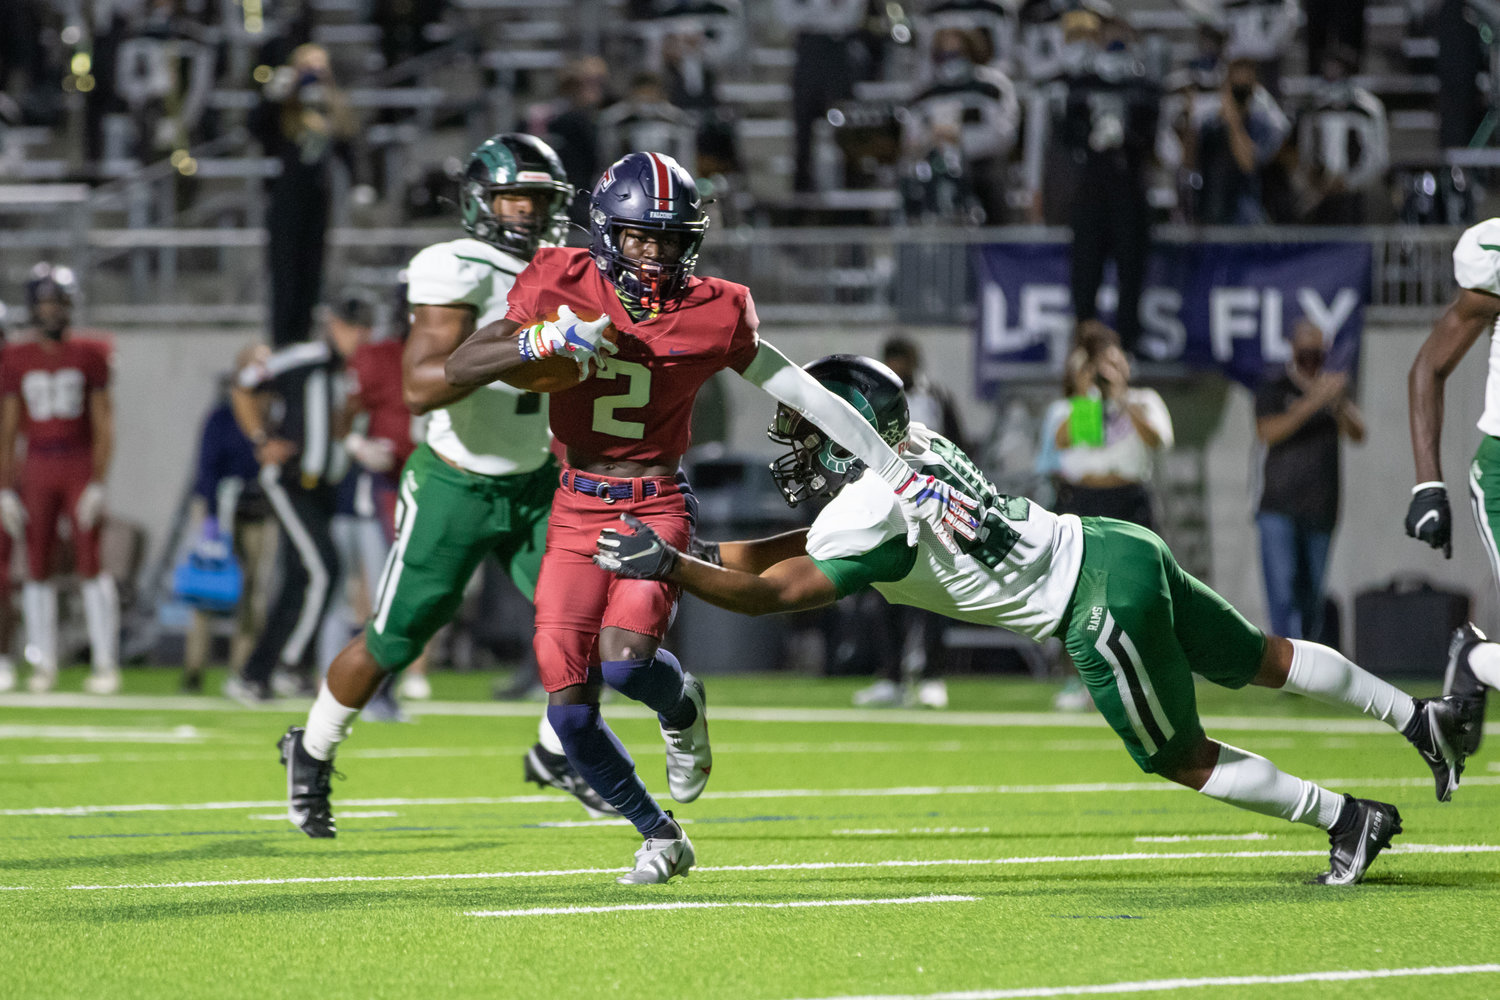 Tompkins receiver Joshua McMillan II makes a catch-and-run during the Falcons' win over Mayde Creek on Thursday evening at Legacy Stadium.